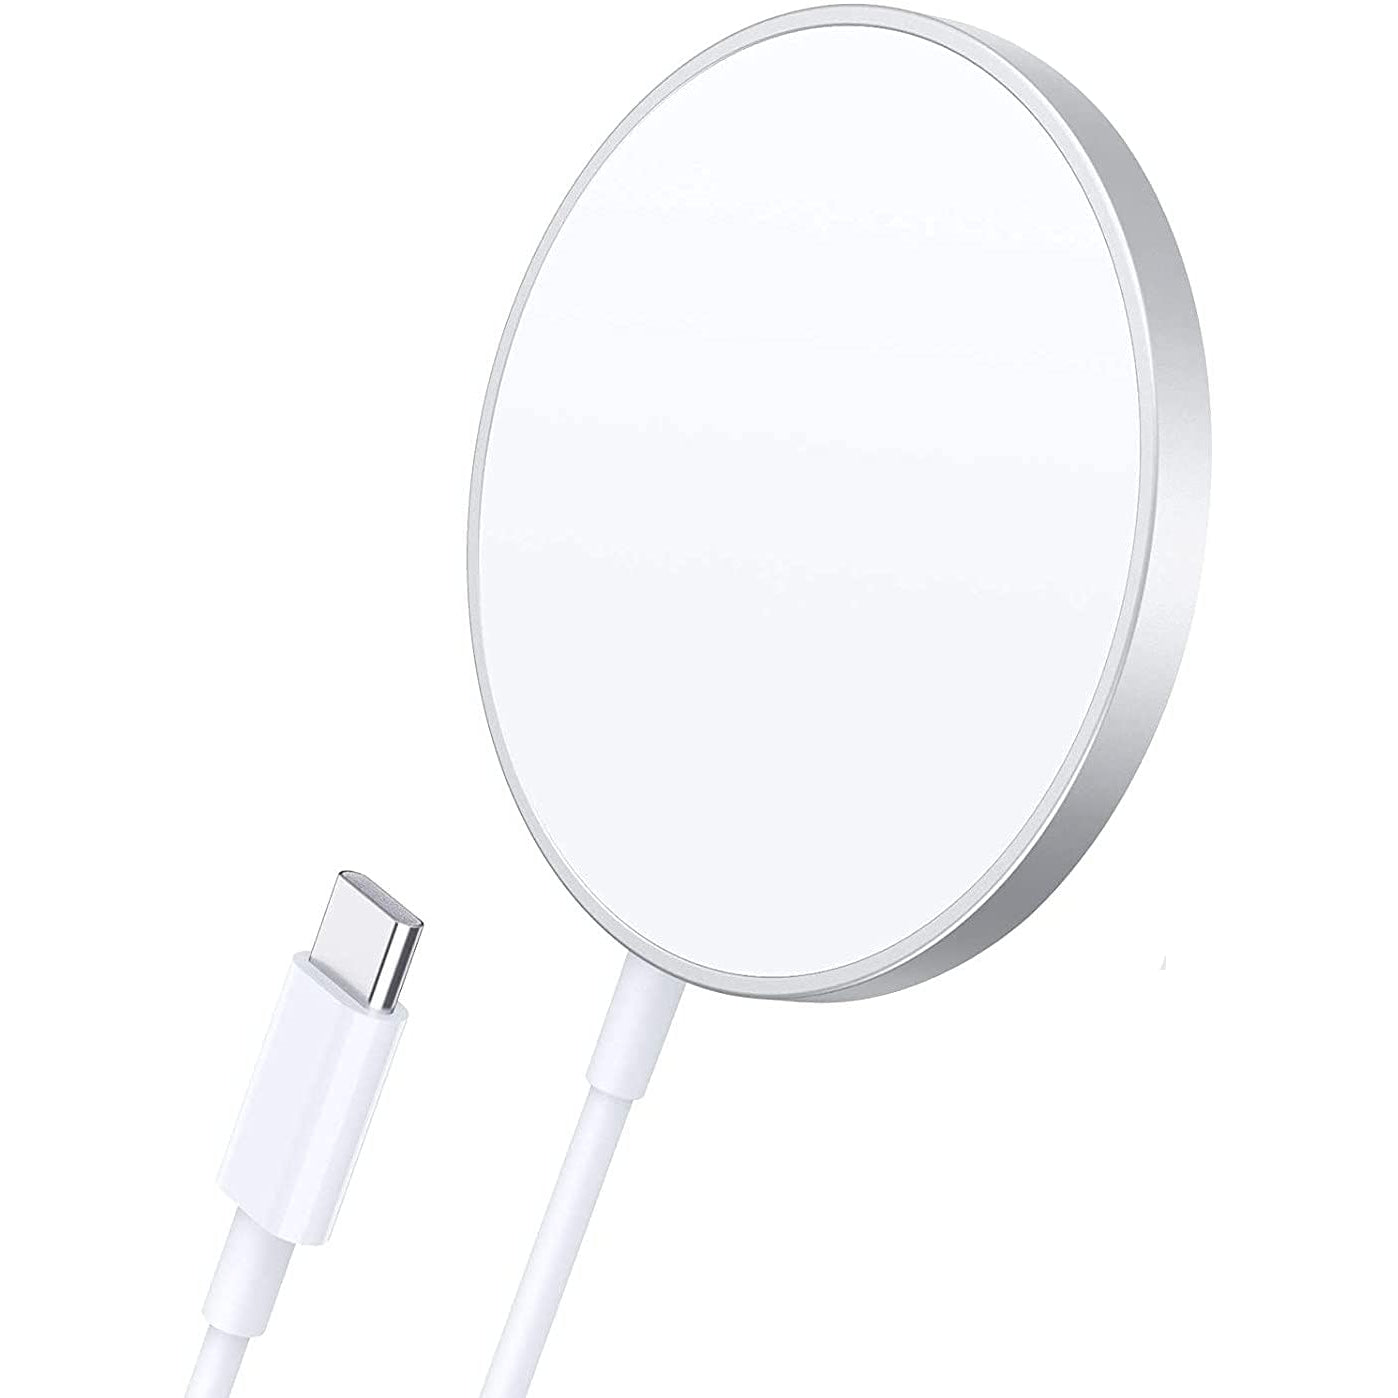 USB-C Magnetic Wireless Charging Cable